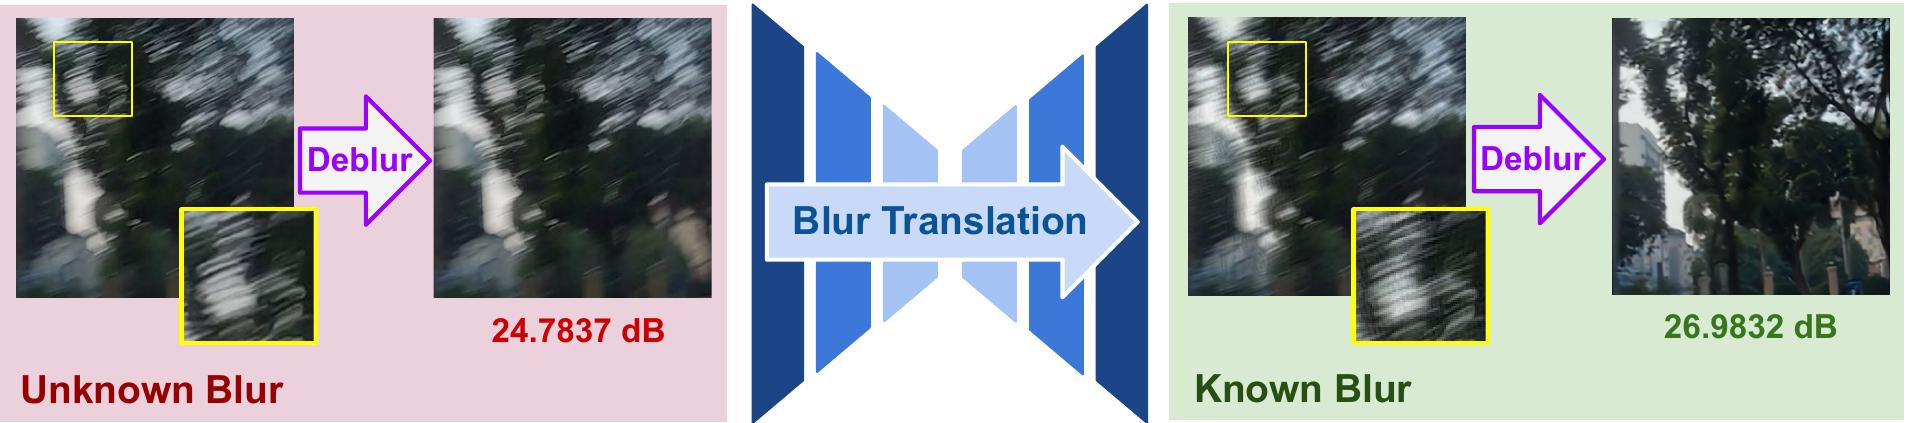 Blur2Blur: Blur Conversion for Unsupervised Image Deblurring on Unknown Domains